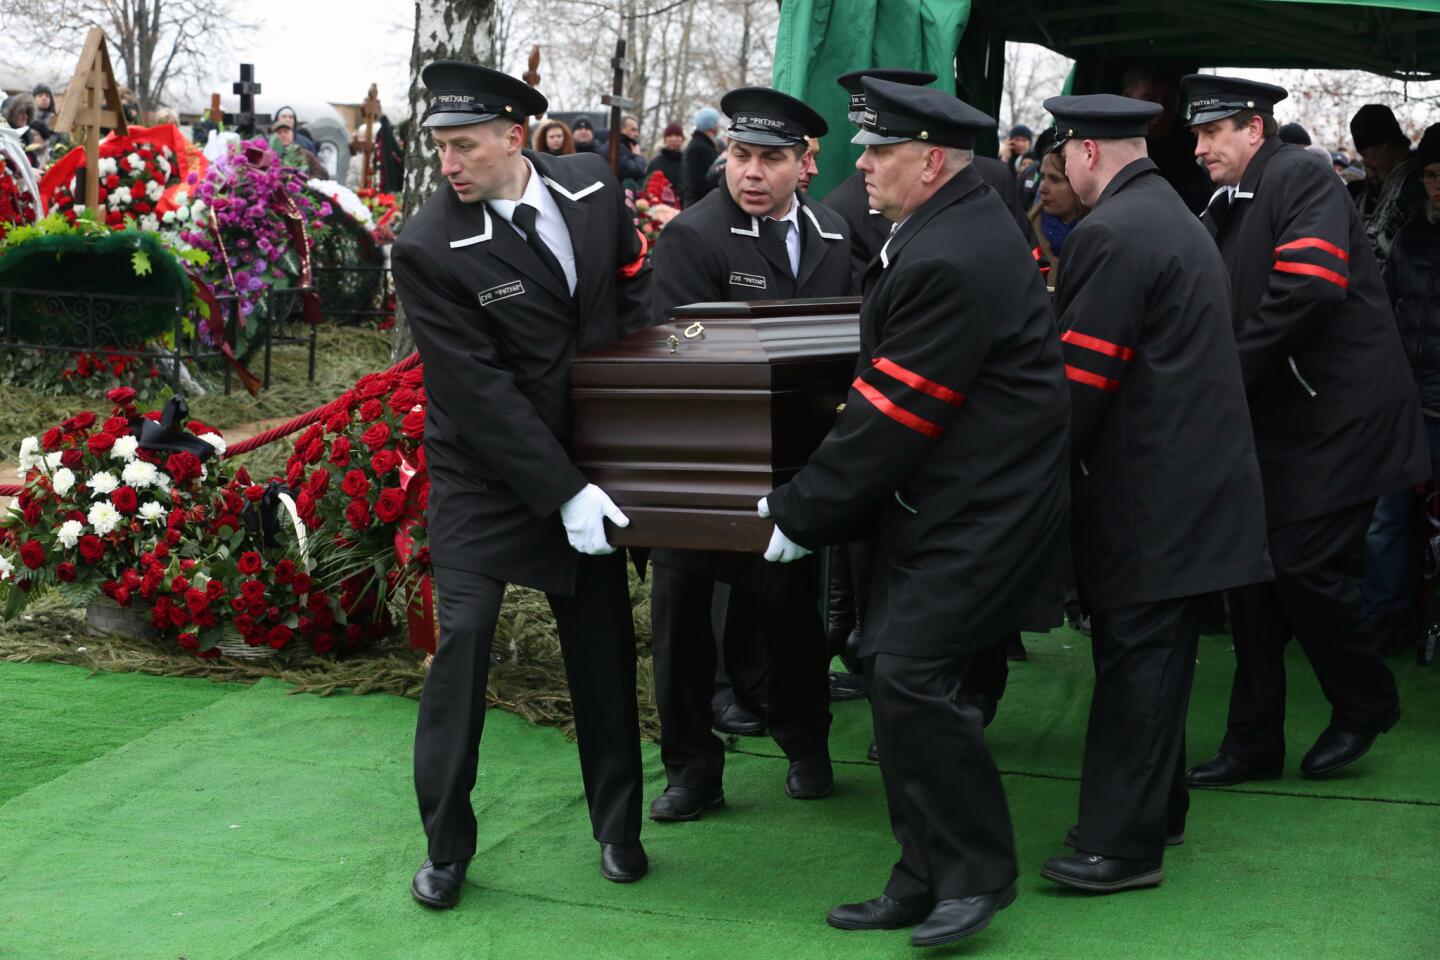 Boris Nemtsov's casket is carried to his grave Tuesday at a Moscow cemetery.